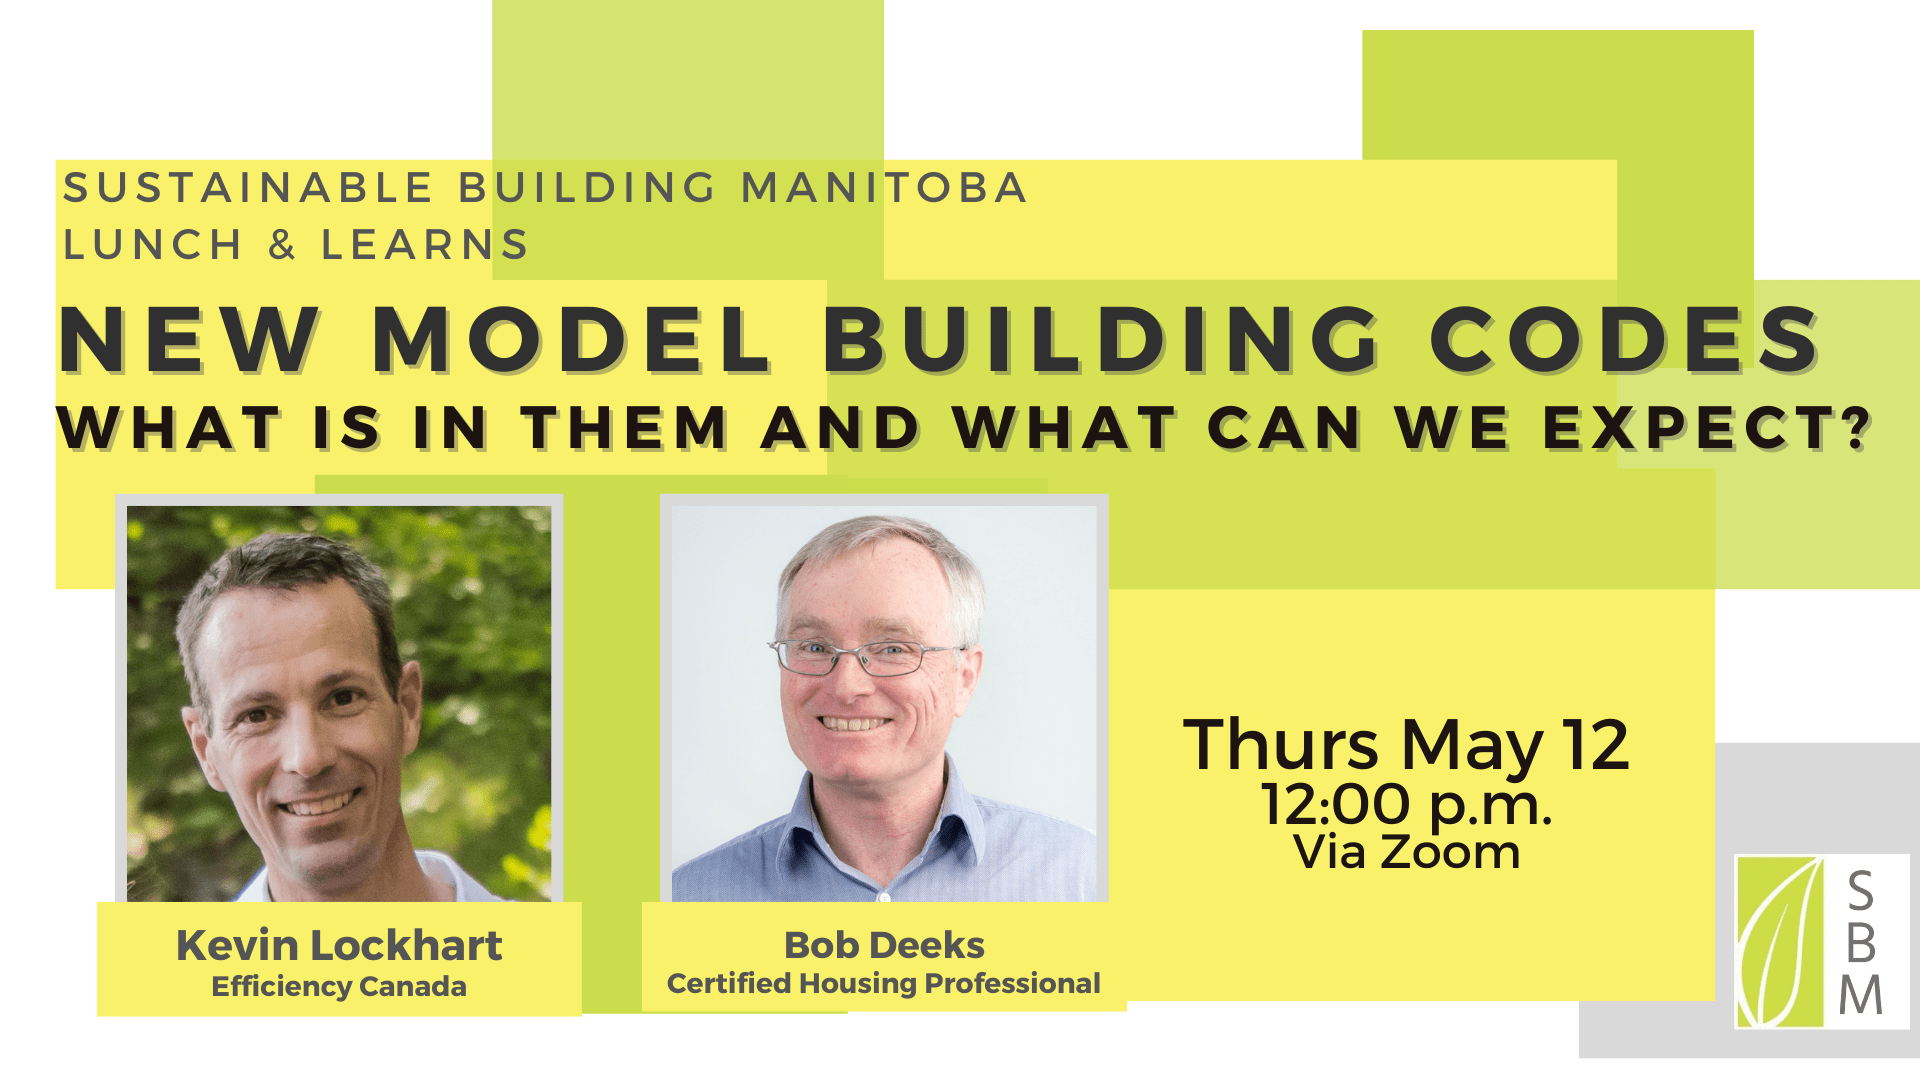 NEW MODEL BUILDING CODES what is in them and what can we expect? Thursday May 12 at noon via Zoom with Kevin Lockhart from efficiency Canada and Bob Deeks a Certified Housing Professional